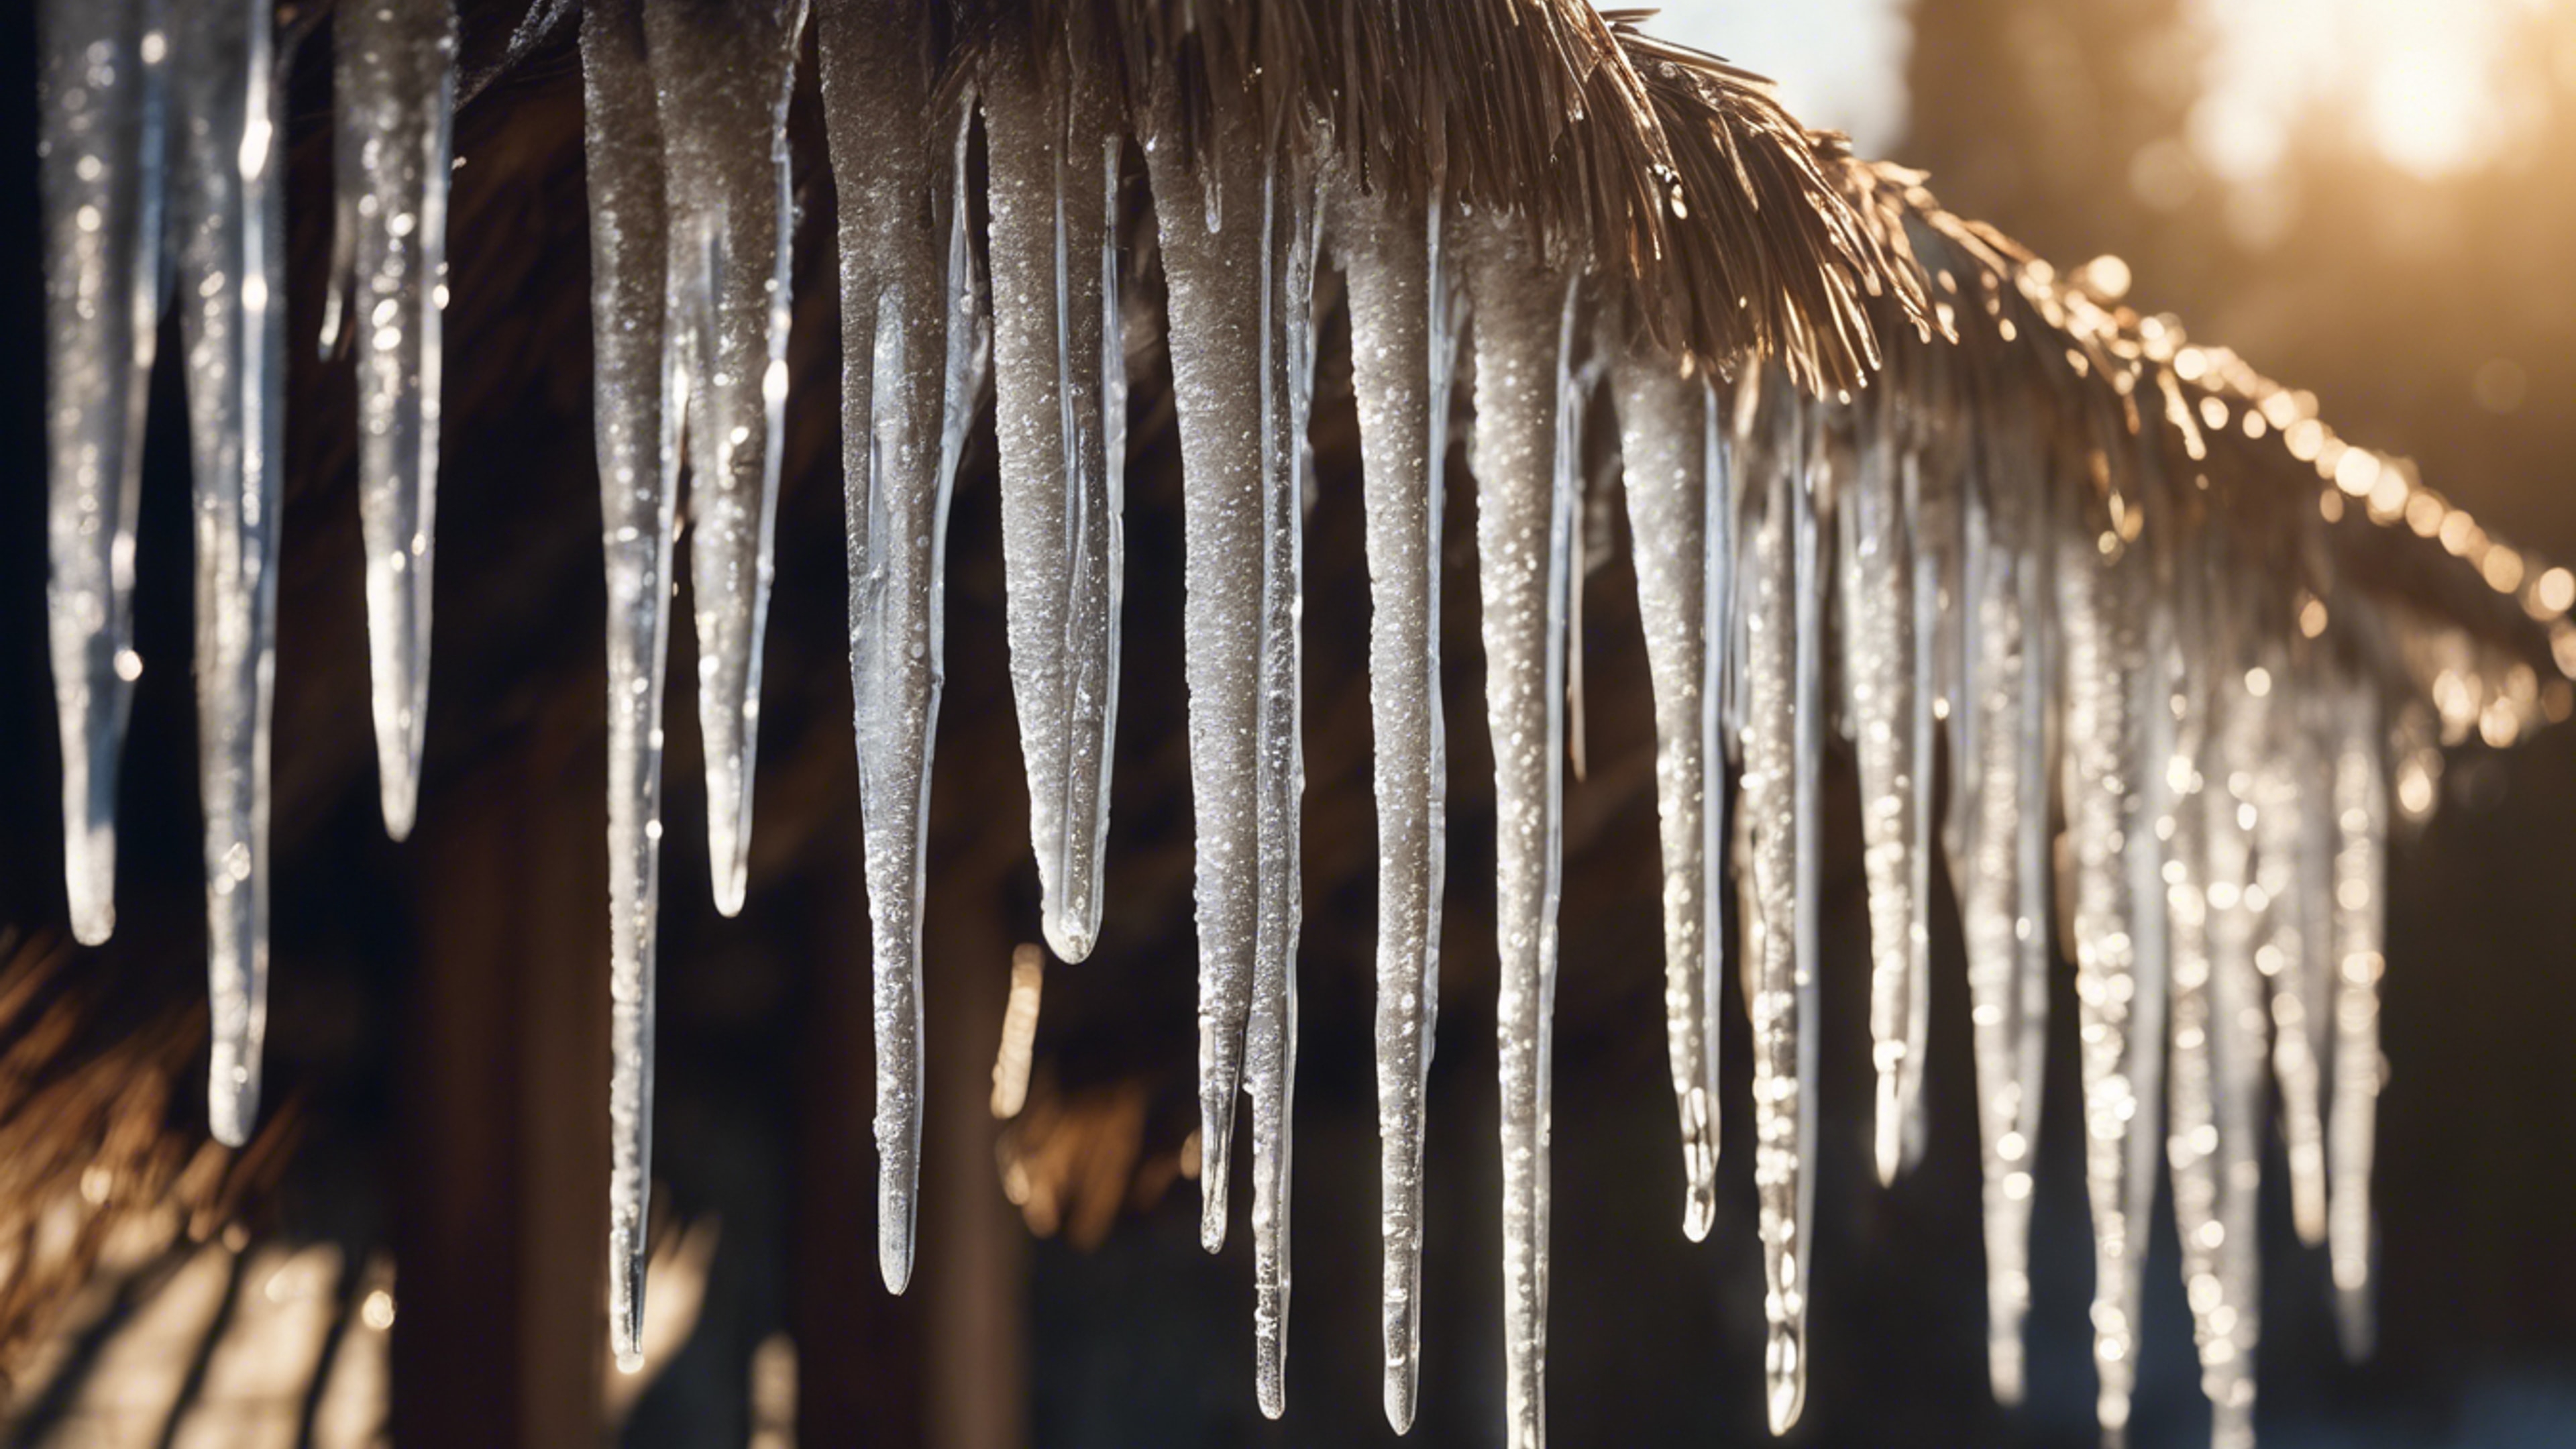 An array of icicles hanging from a thatched roof, with each one catching the soft rays of the winter sun. Wallpaper[99d61ea78148406d9988]